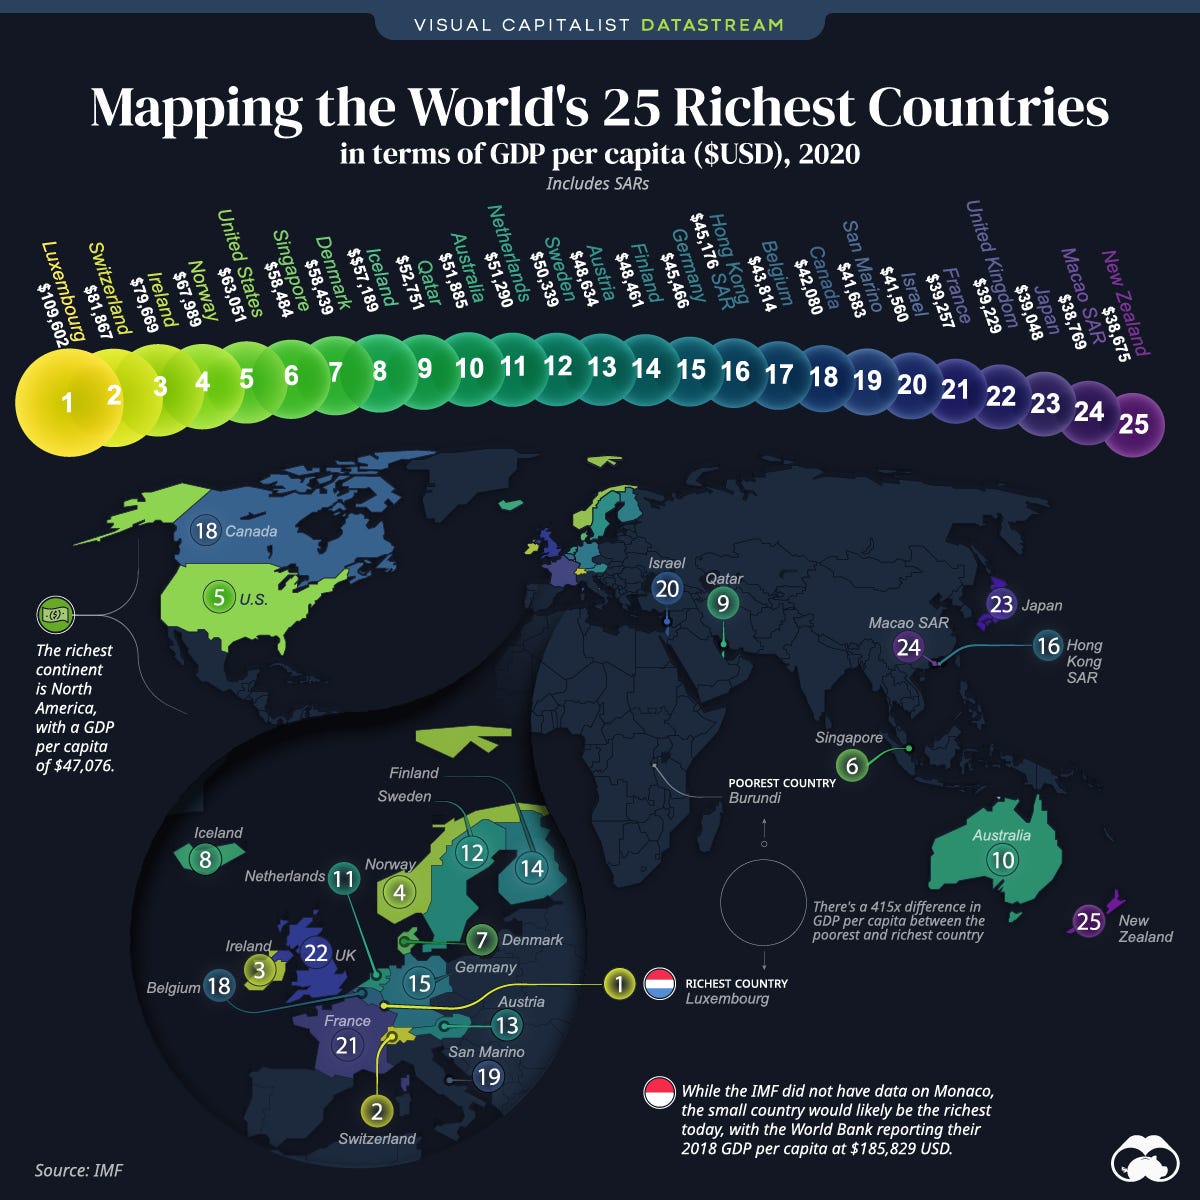 richest countries by gdp per capita